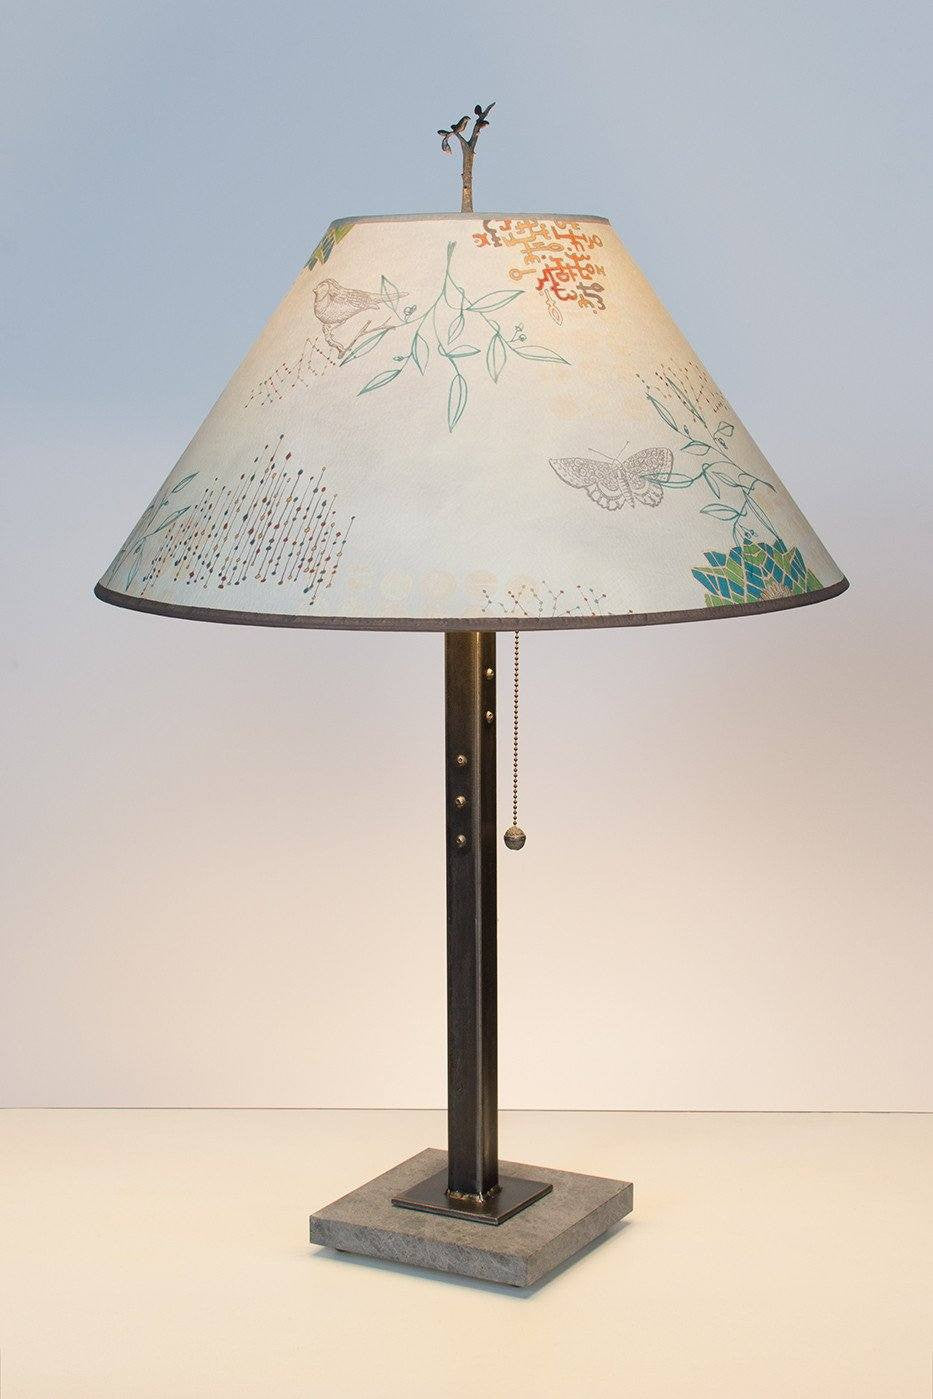 Janna Ugone & Co Table Lamps Steel Table Lamp with Large Conical Shade in Ecru Journey